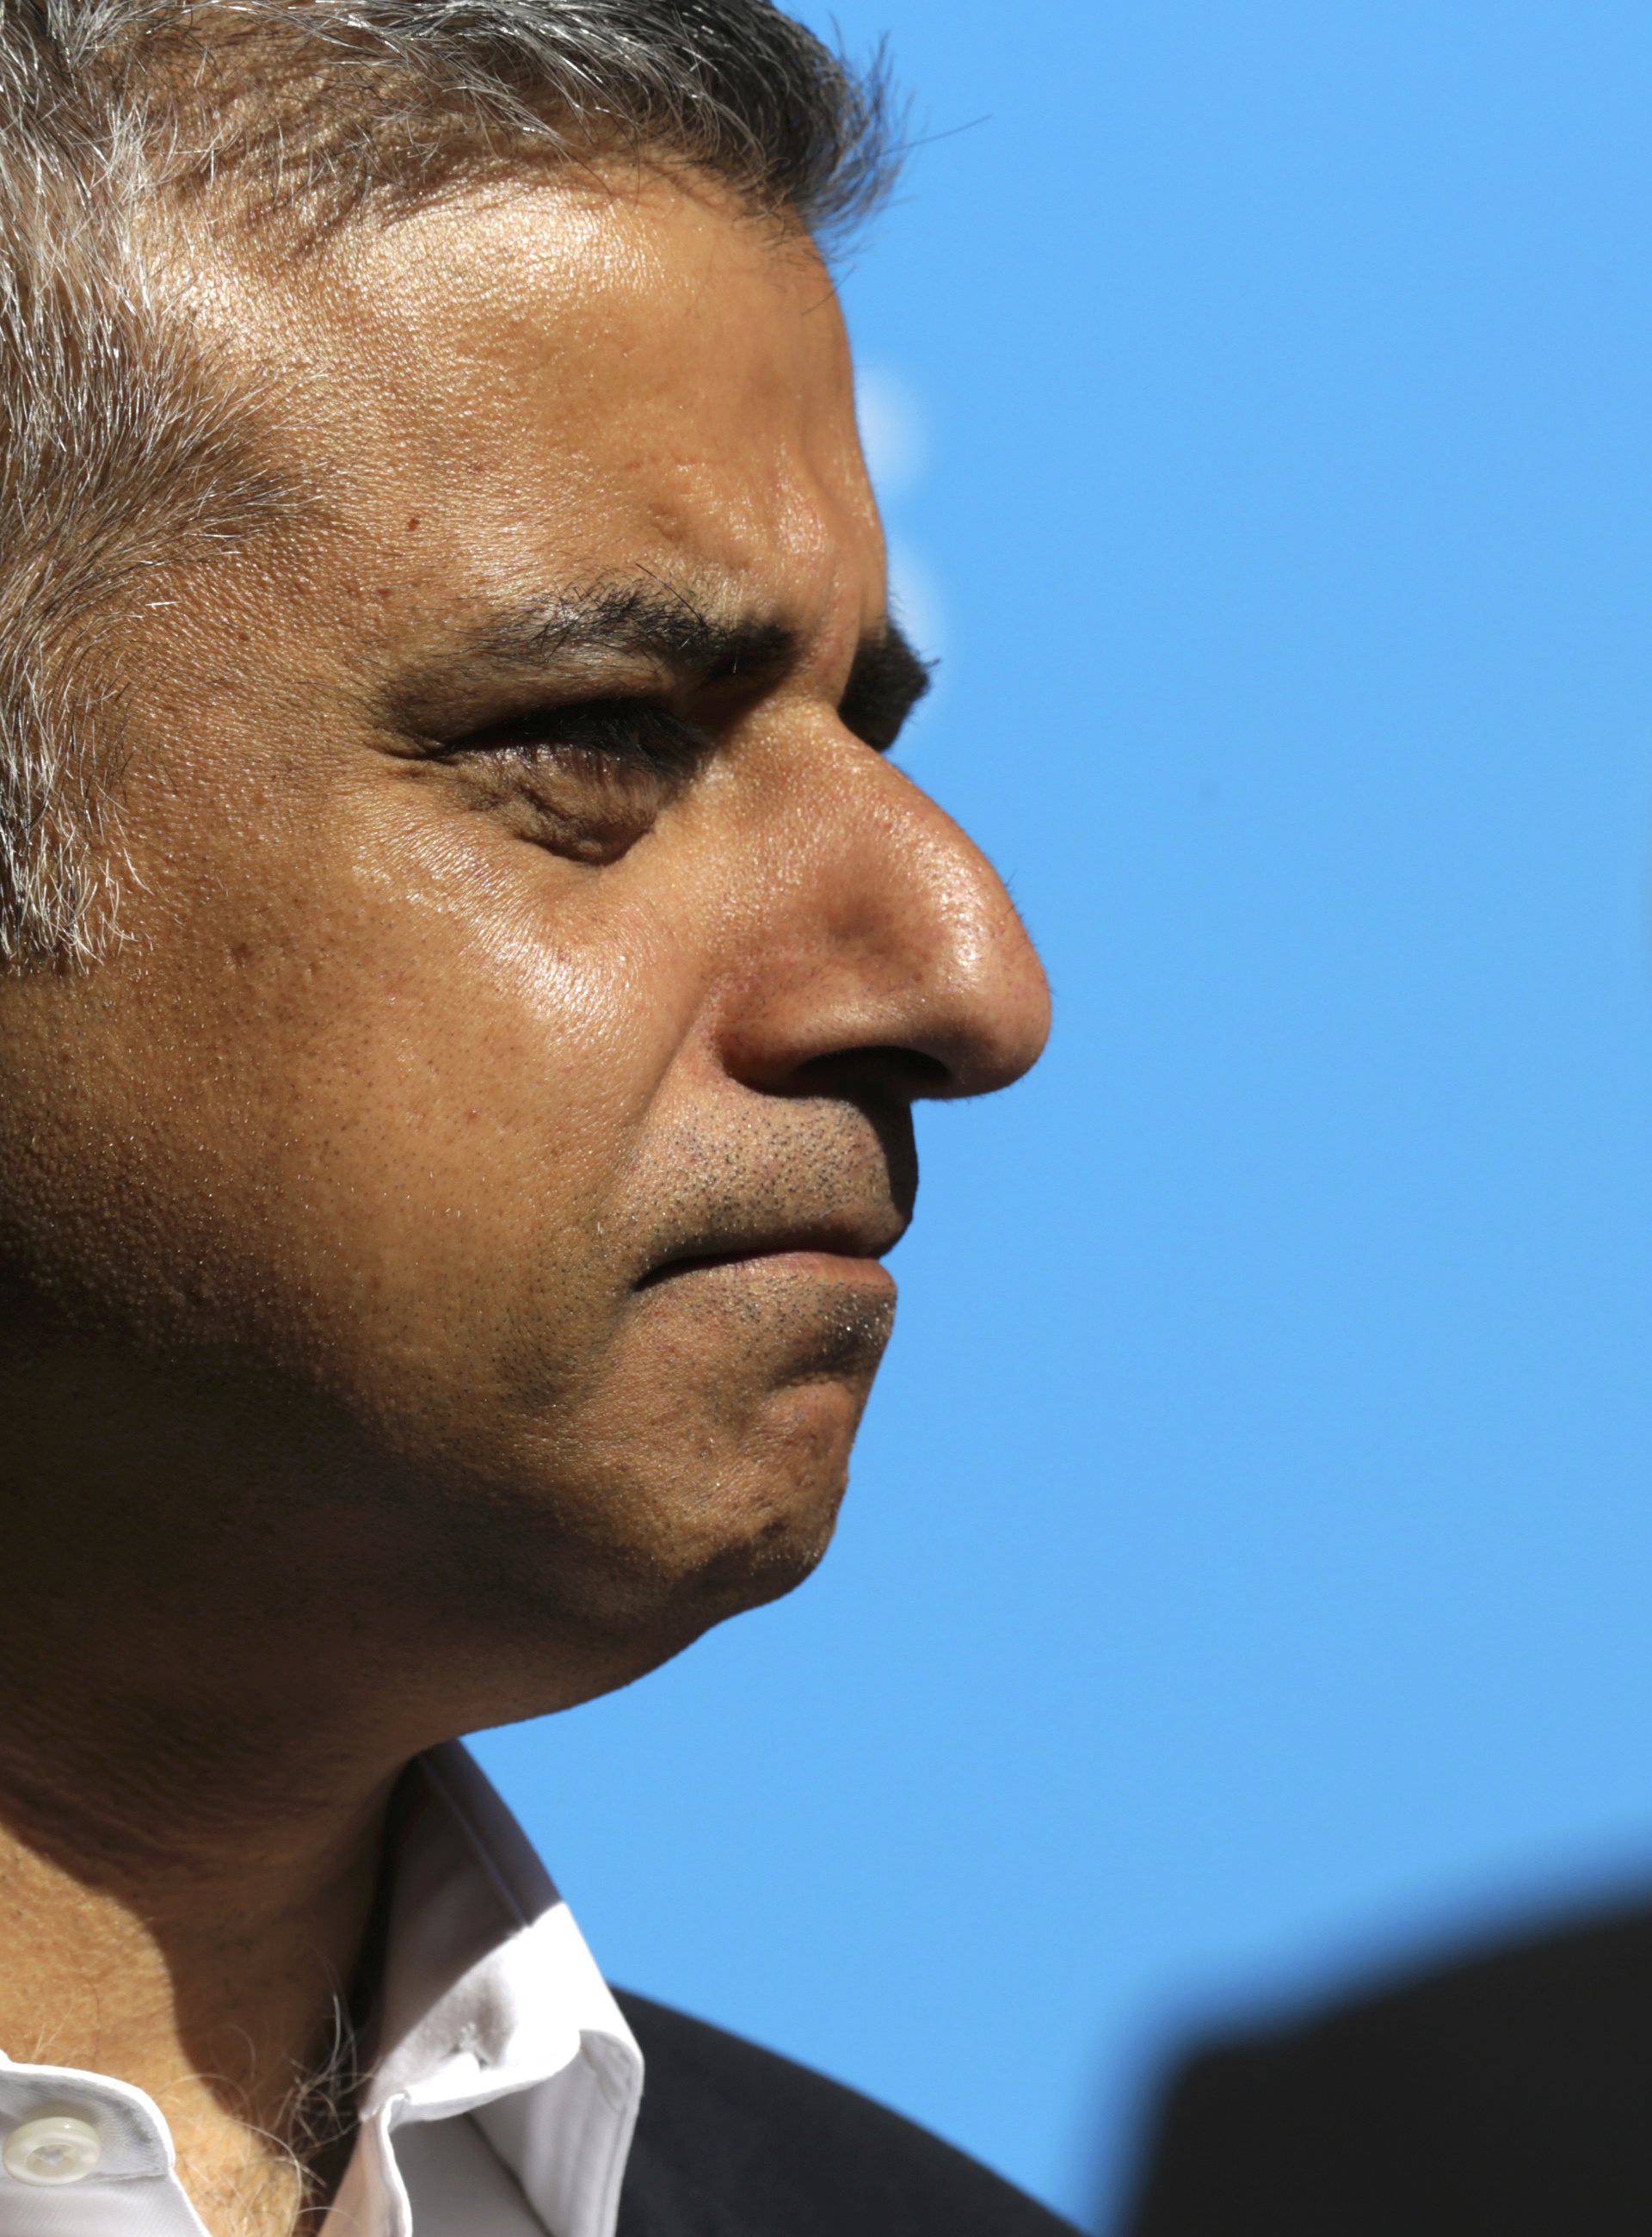 Sadiq Khan, Britain's Labour Party candidate for Mayor of London, speaks to the media at Canary Wharf in London